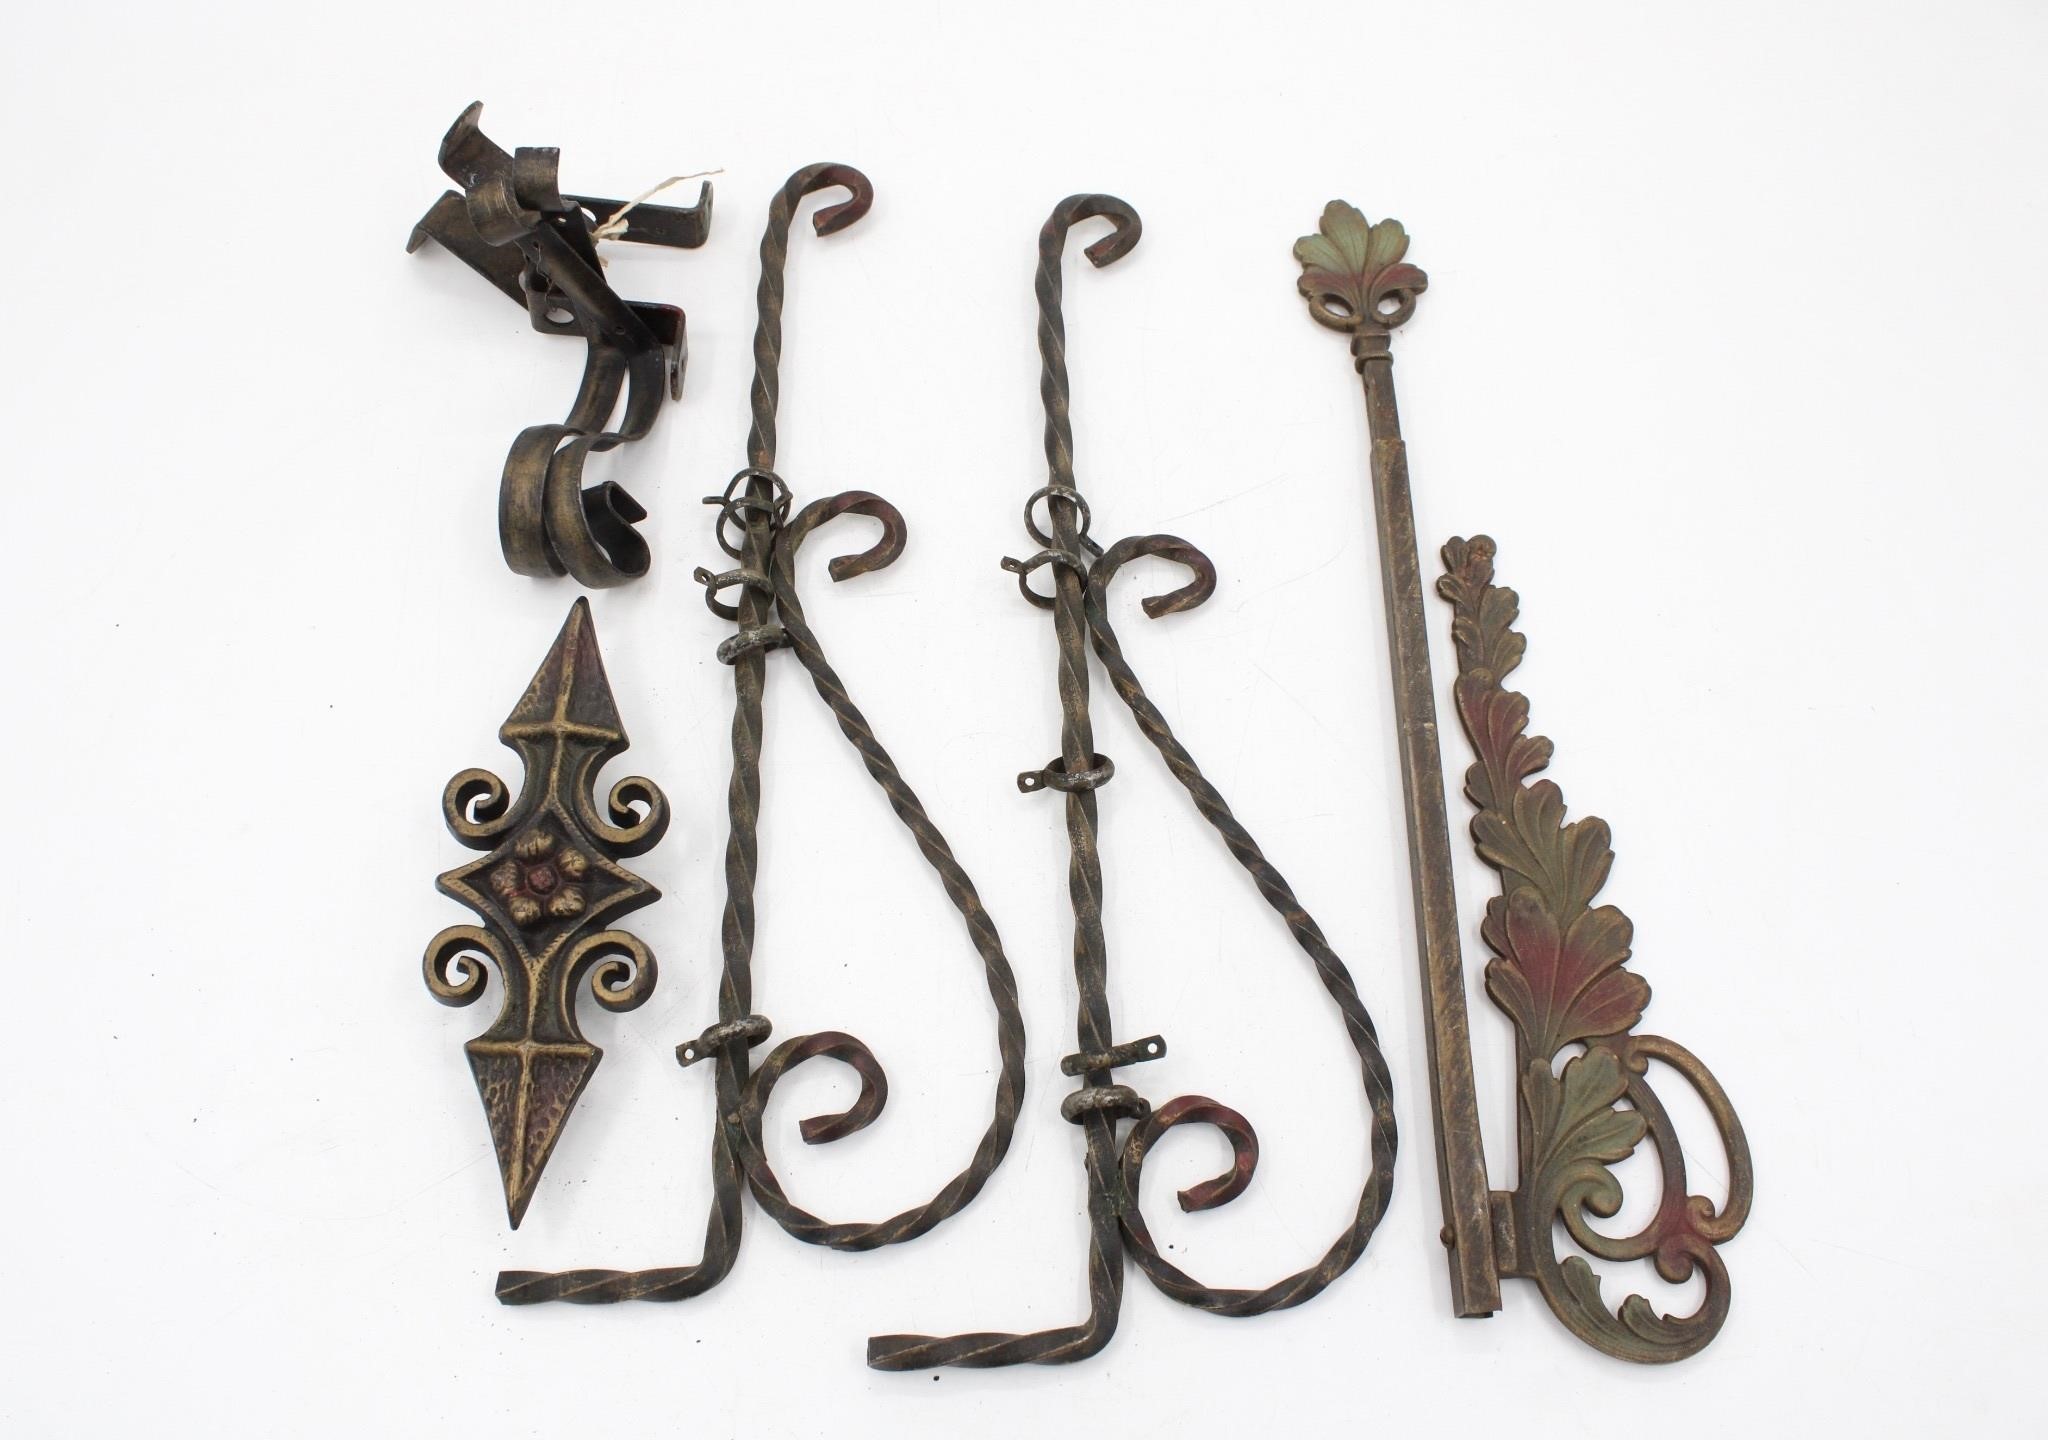 Antique Twisted Wrought Iron Curtain Rod Fixtures